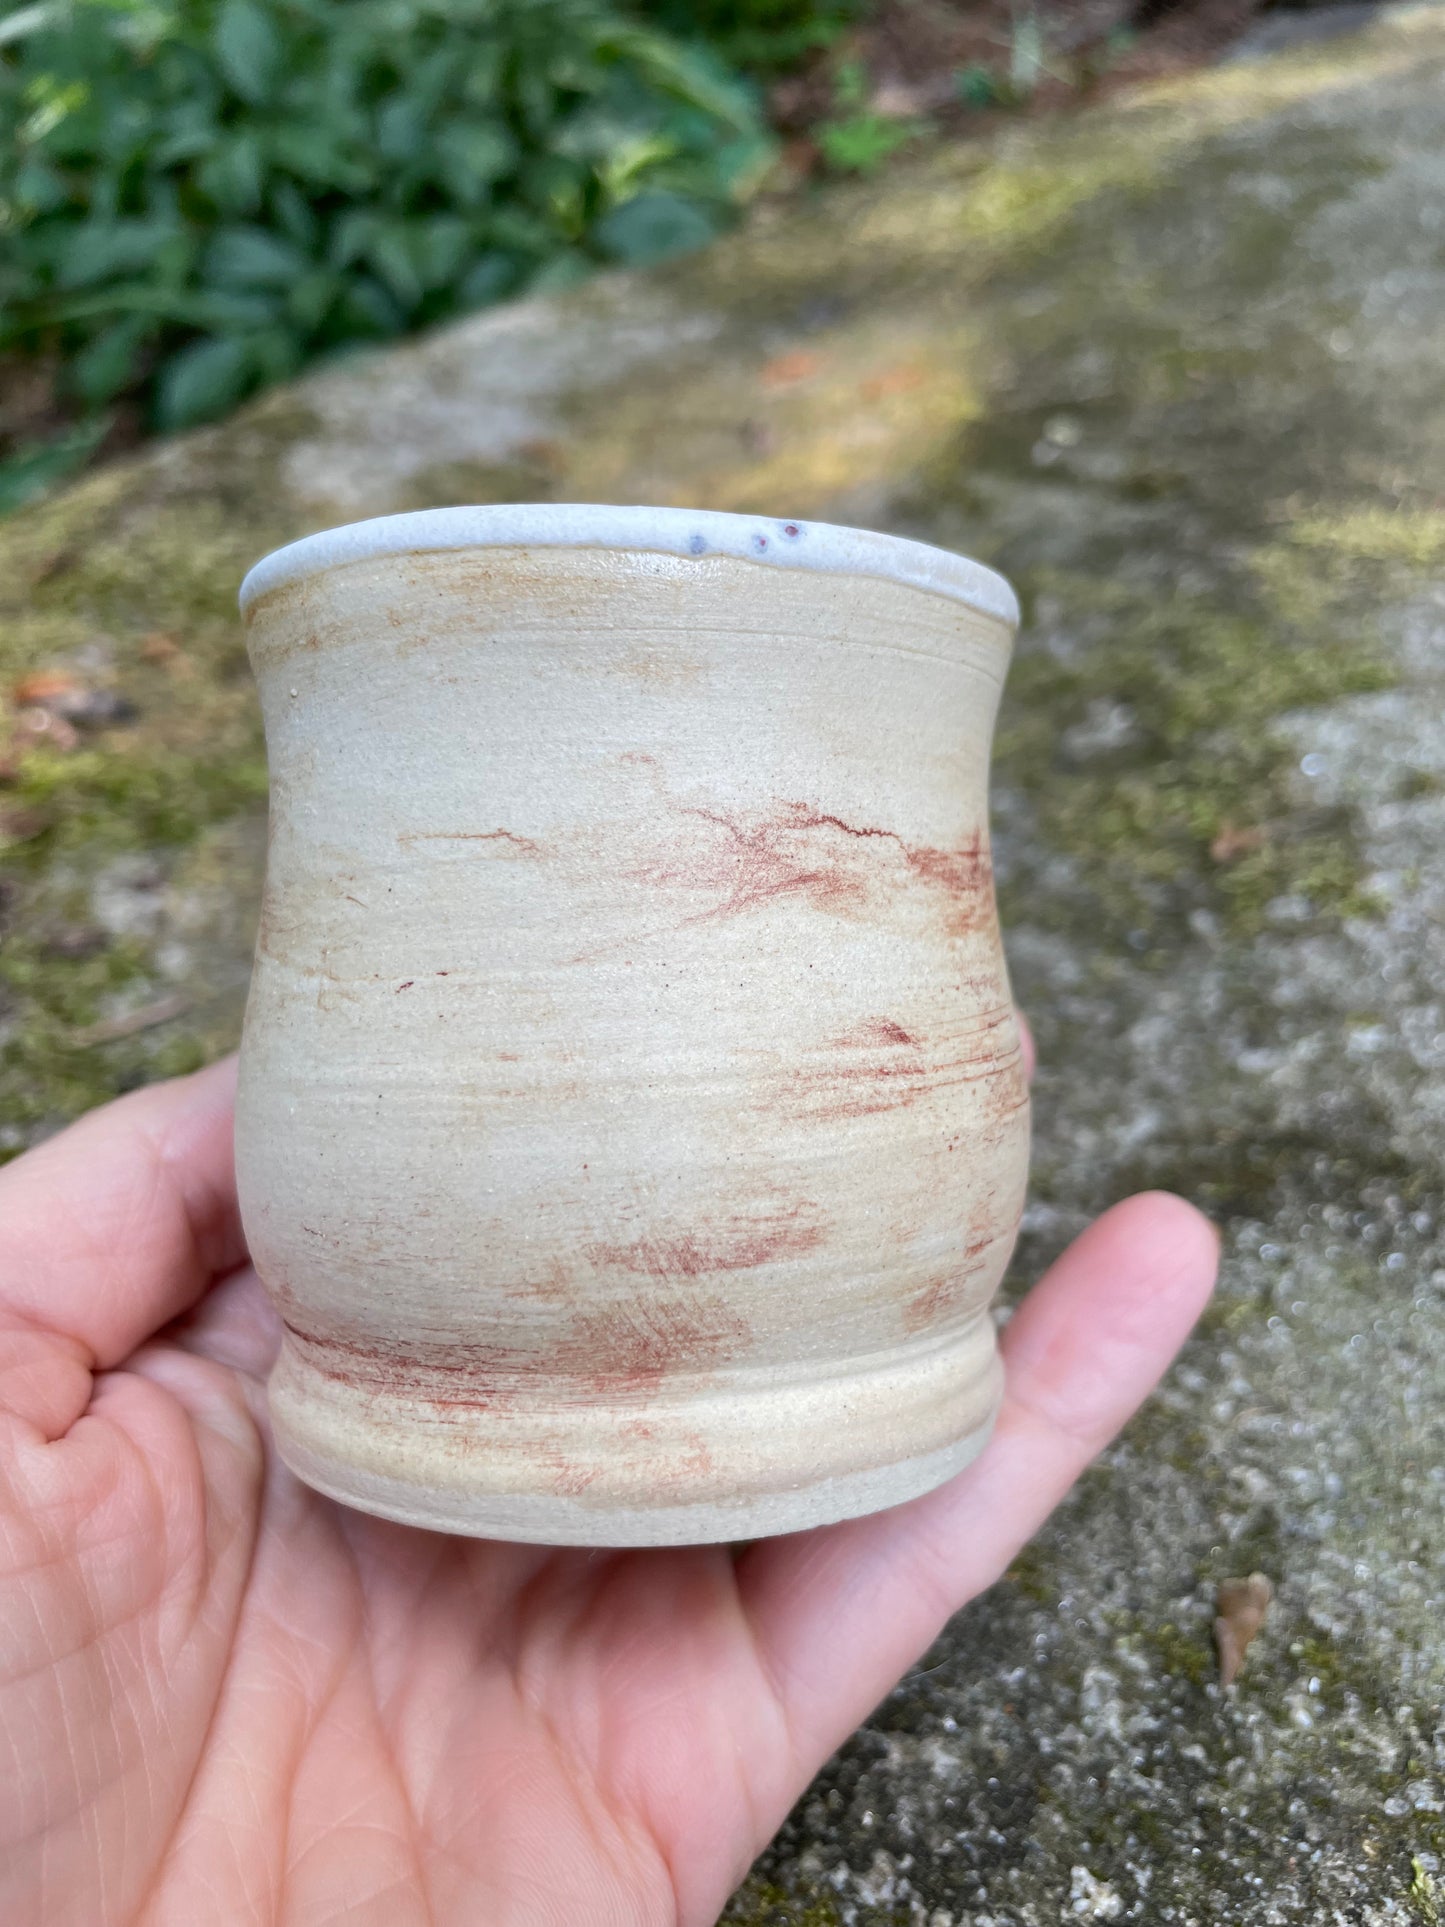 Wildflower Cup